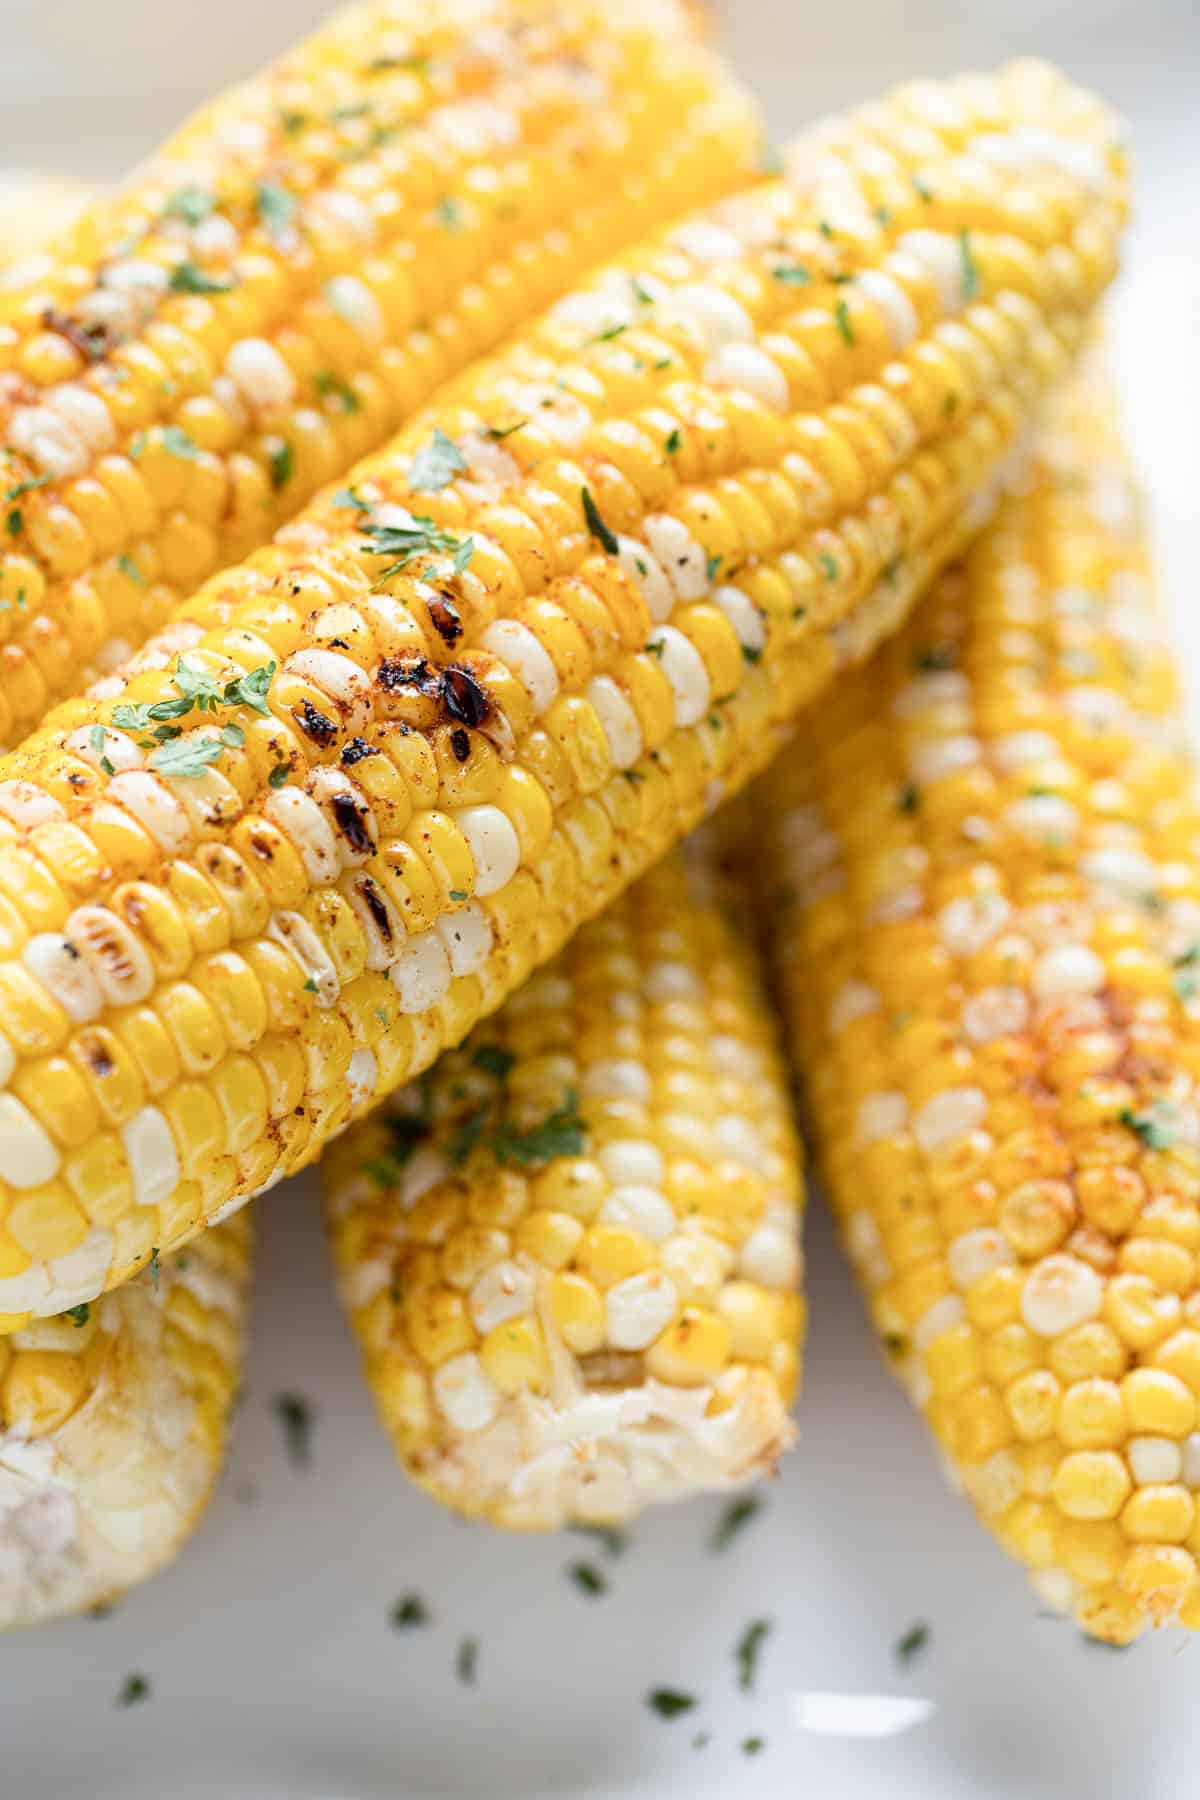 A close image of fresh sweet corn that has been grilled.